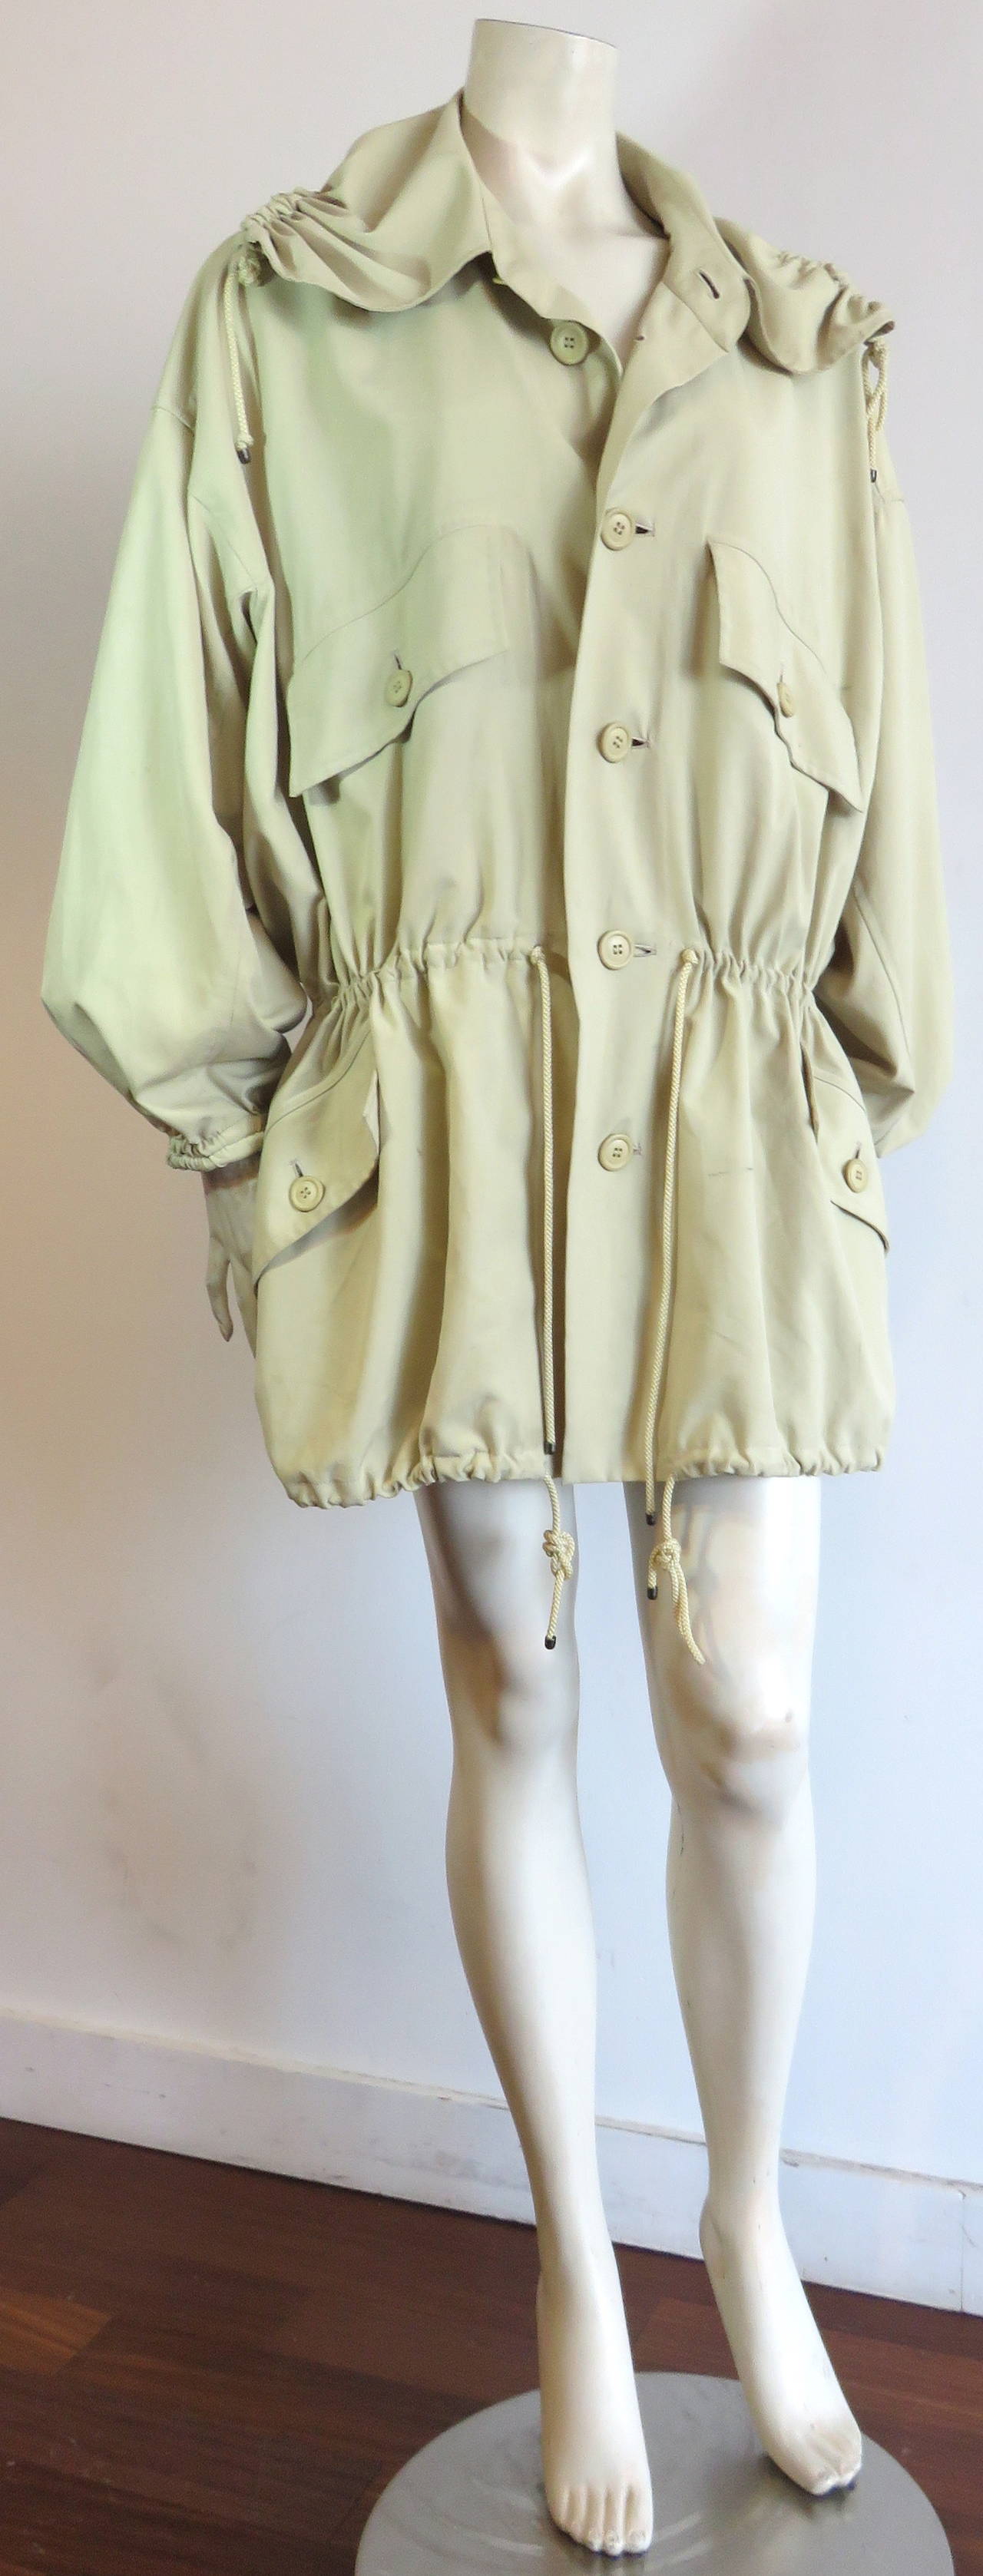 Wonderful, 1980's ISSEY MIYAKE Windcoat in creme/ochre color.

Light-weight silky, micro-fiber, woven fabrication.

Gathered/drawstring construction at hood edge, waist, and bottom hem.  Elasticated sleeve cuffs.

Oversized, loose fit, drop